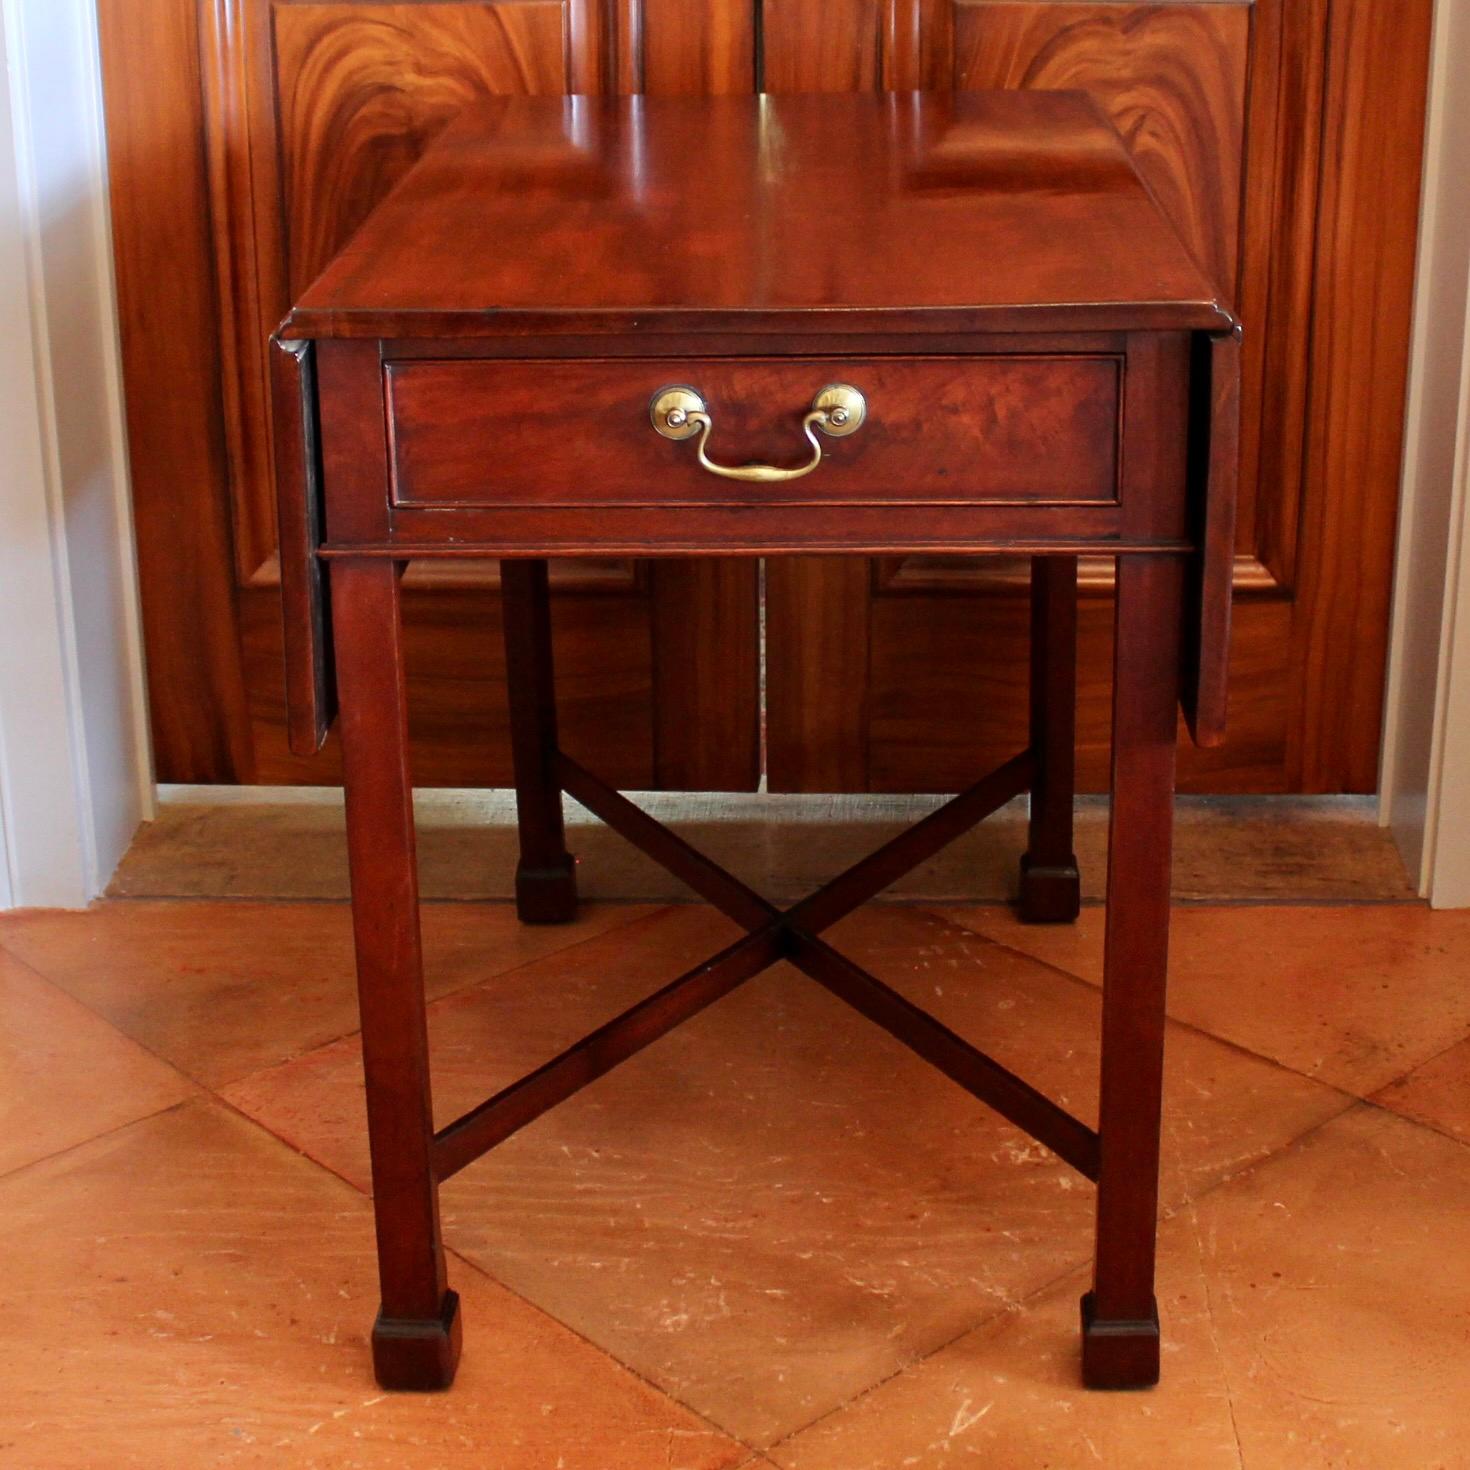 Hand-Crafted American (Philadelphia) Mahogany Pembroke Table with Marlborough Feet For Sale